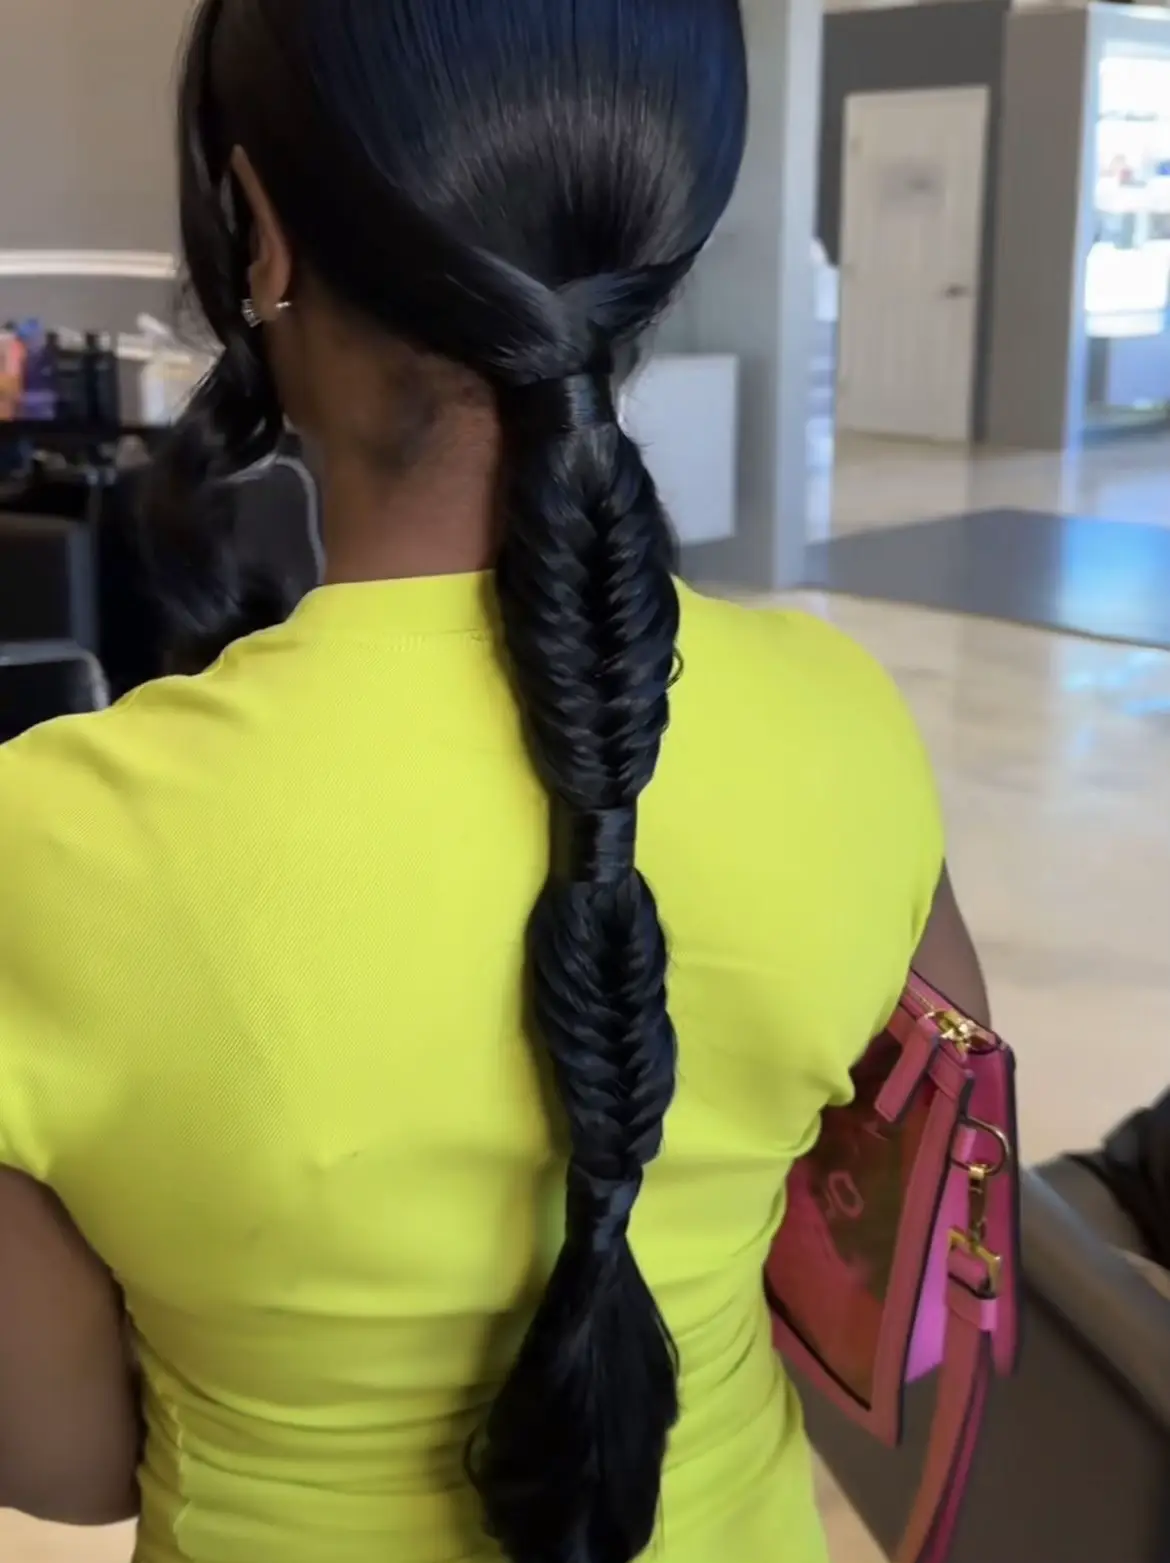 11 Slicked-Back Braided Ponytail Ideas For A Snatched Summer Hair Look